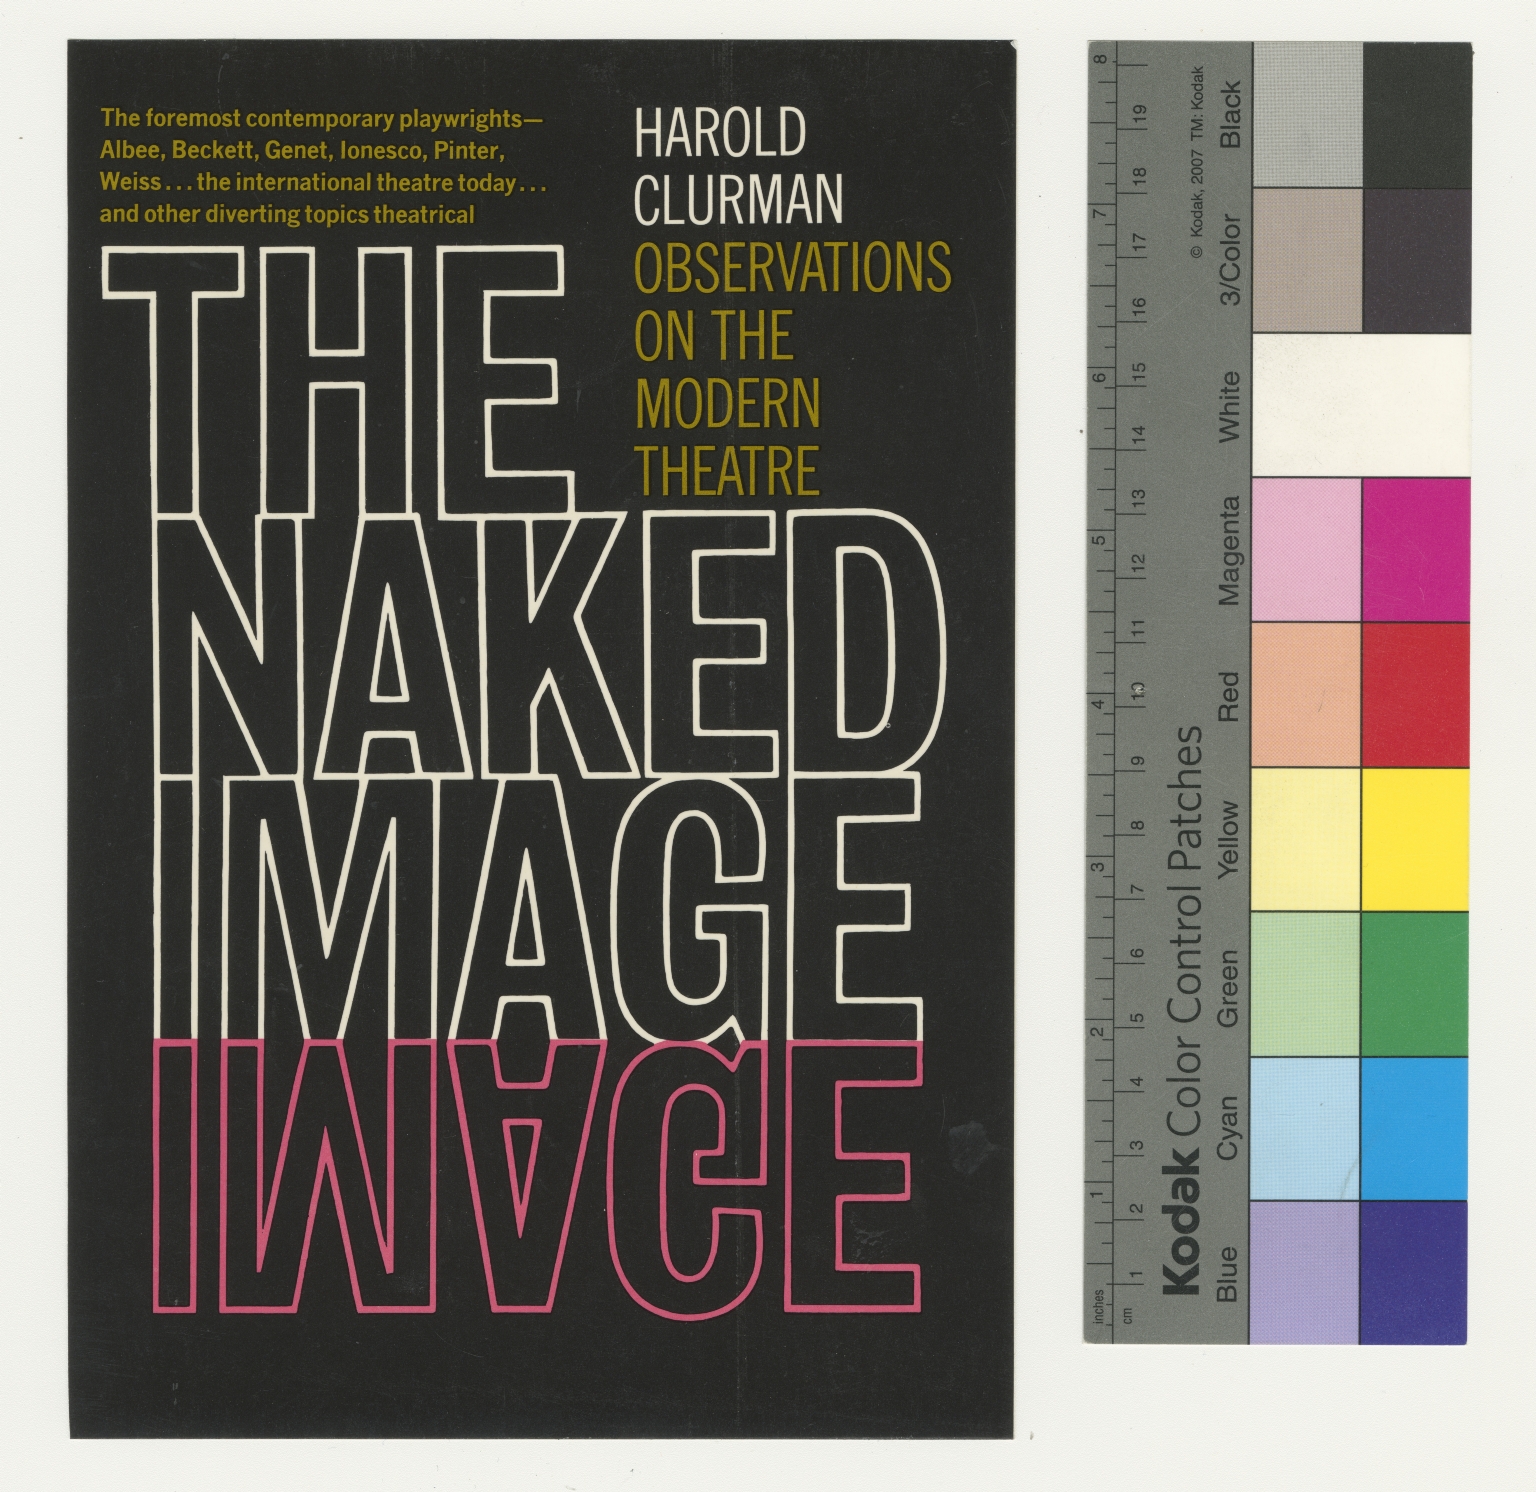 The Naked Image